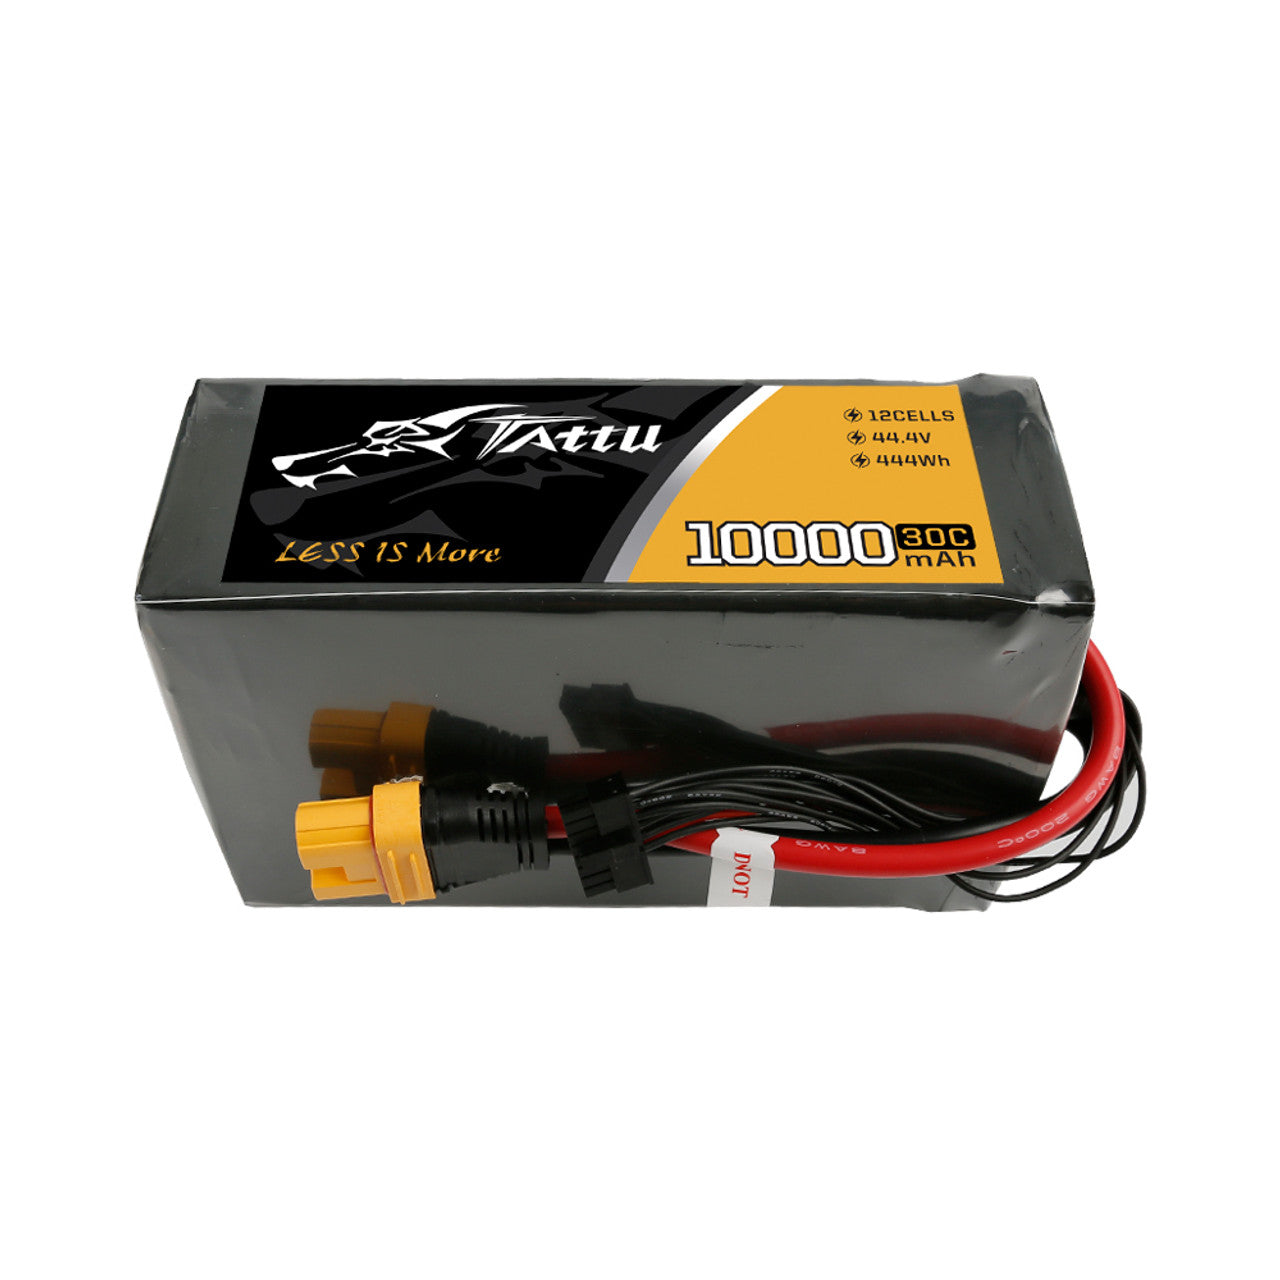 Tattu 44.4V 30C 12S 10000mAh Lipo Battery, Lithium-ion battery pack with AS150U plug, 44.4V, 444Wh, suitable for UAV drones.